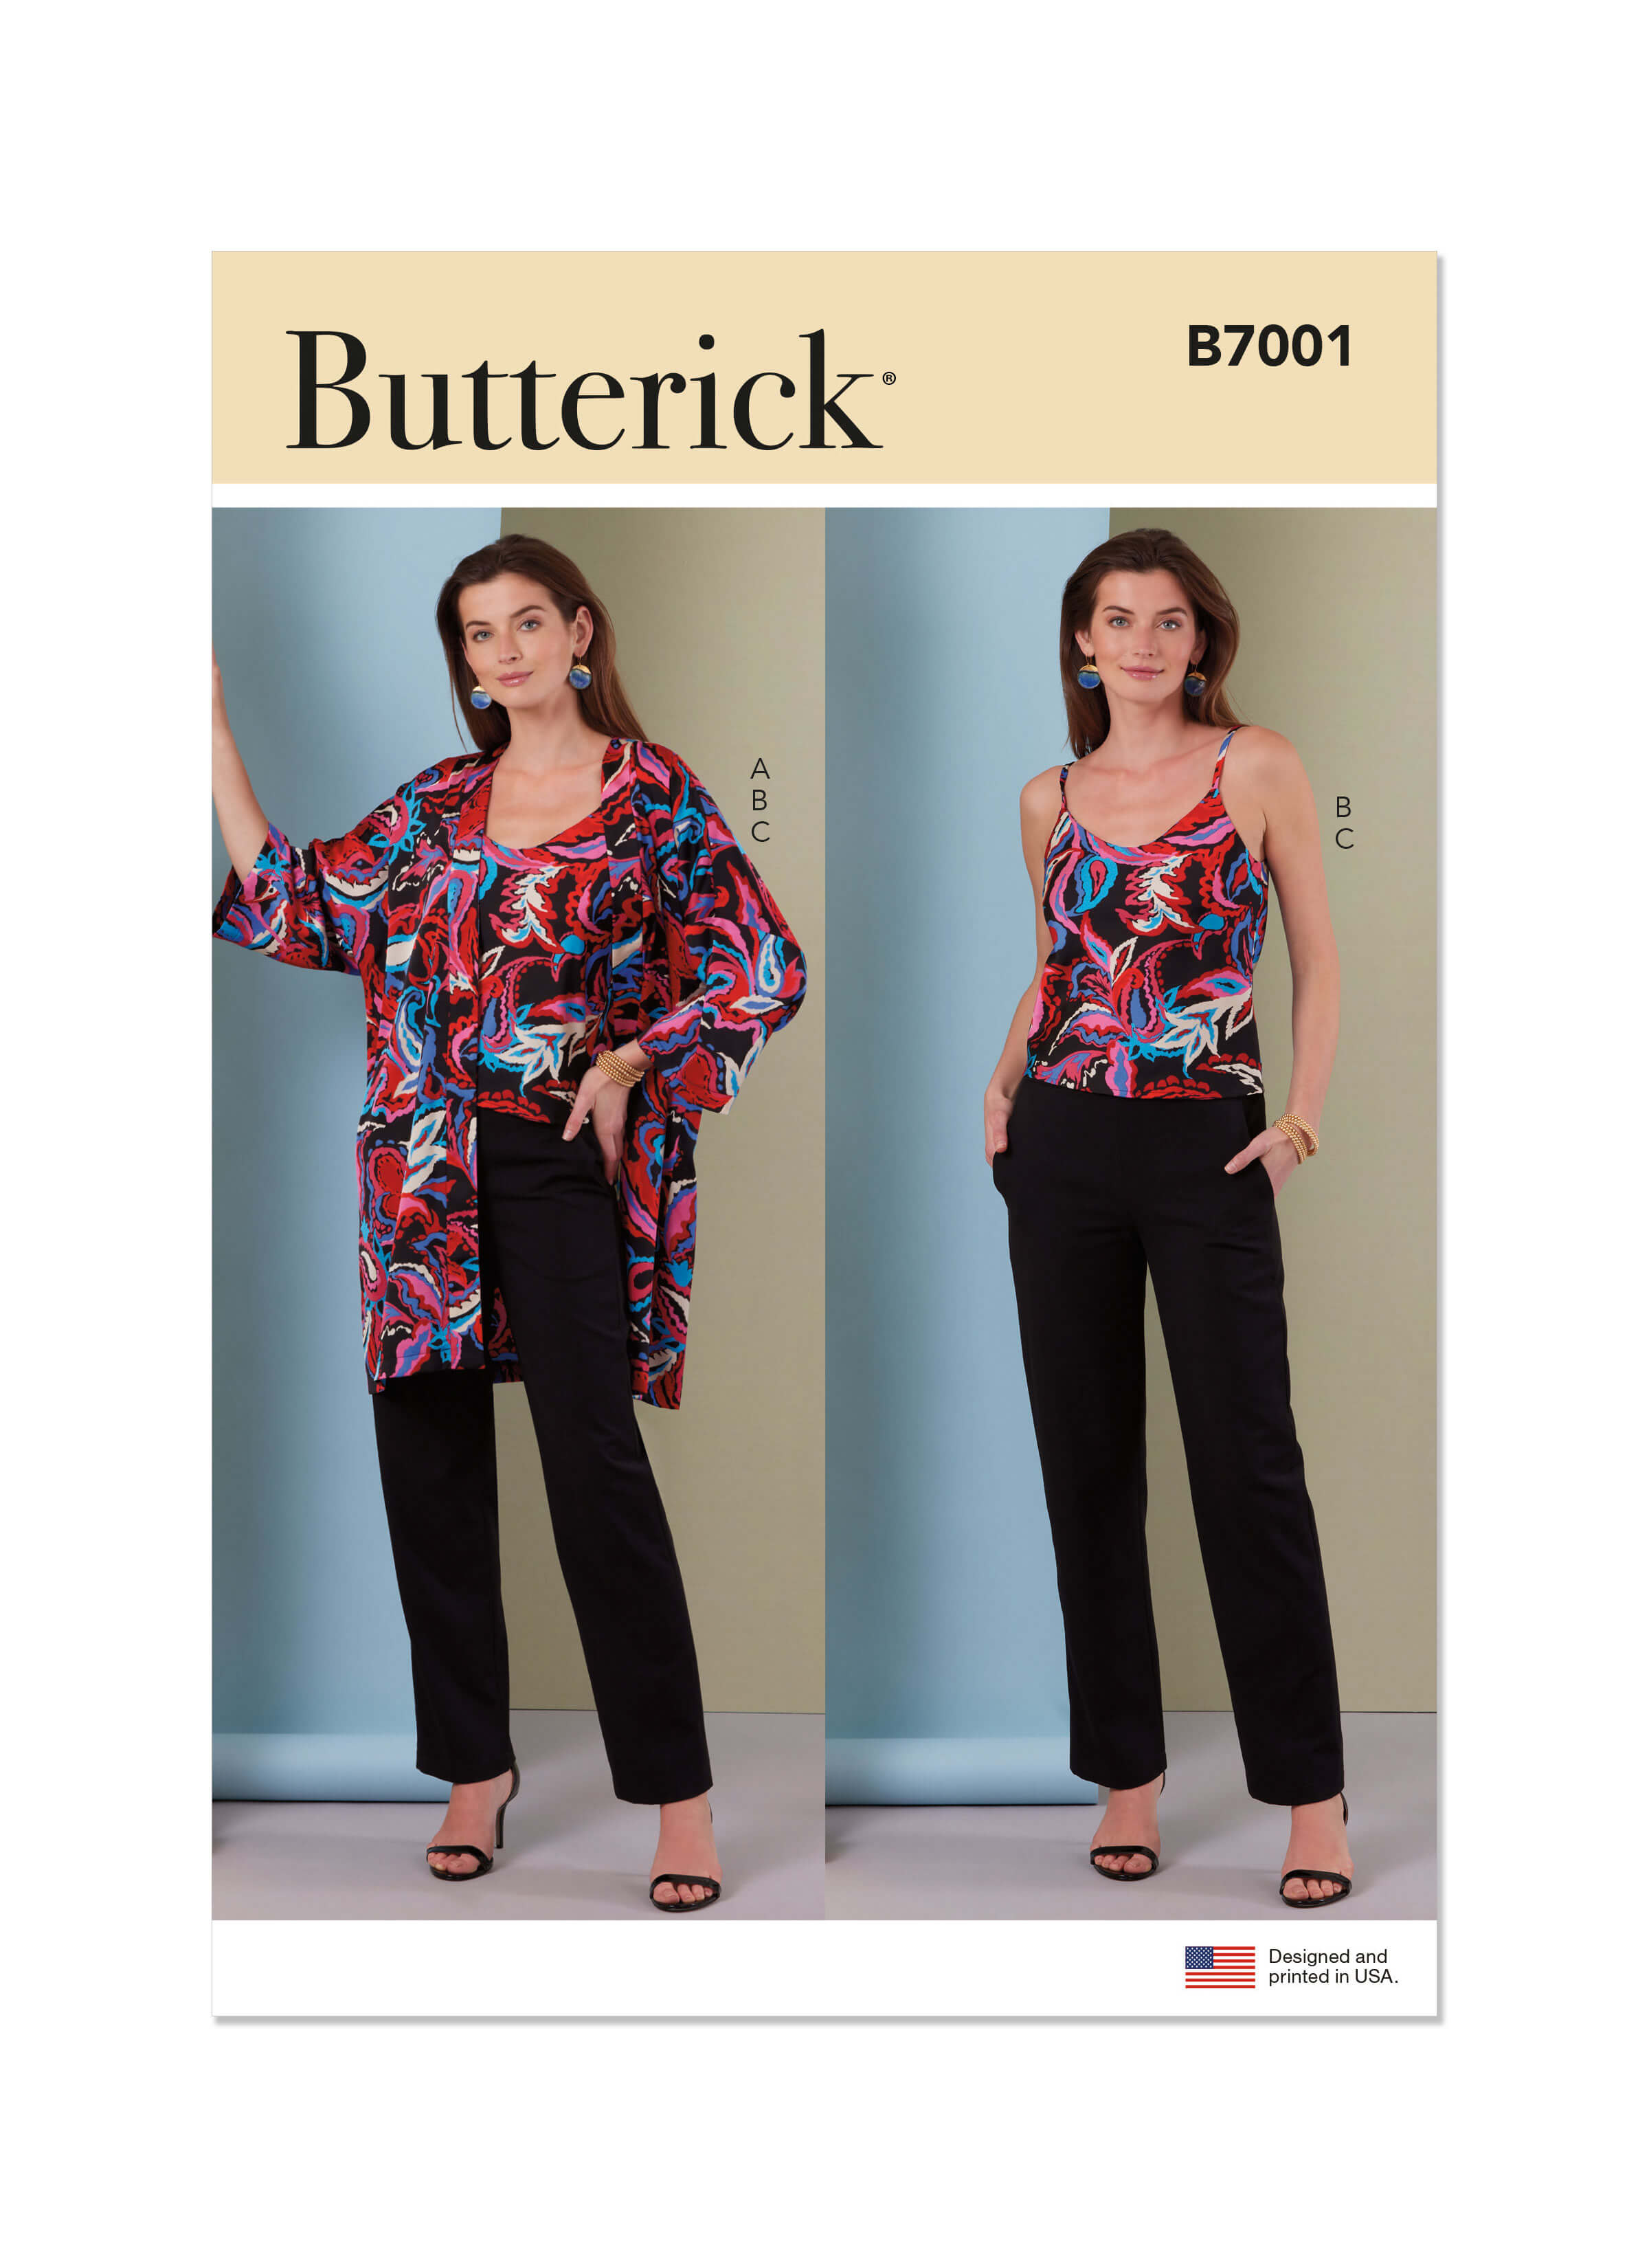 Butterick Sewing Pattern B7001 Misses' Jacket, Camisole and Trousers